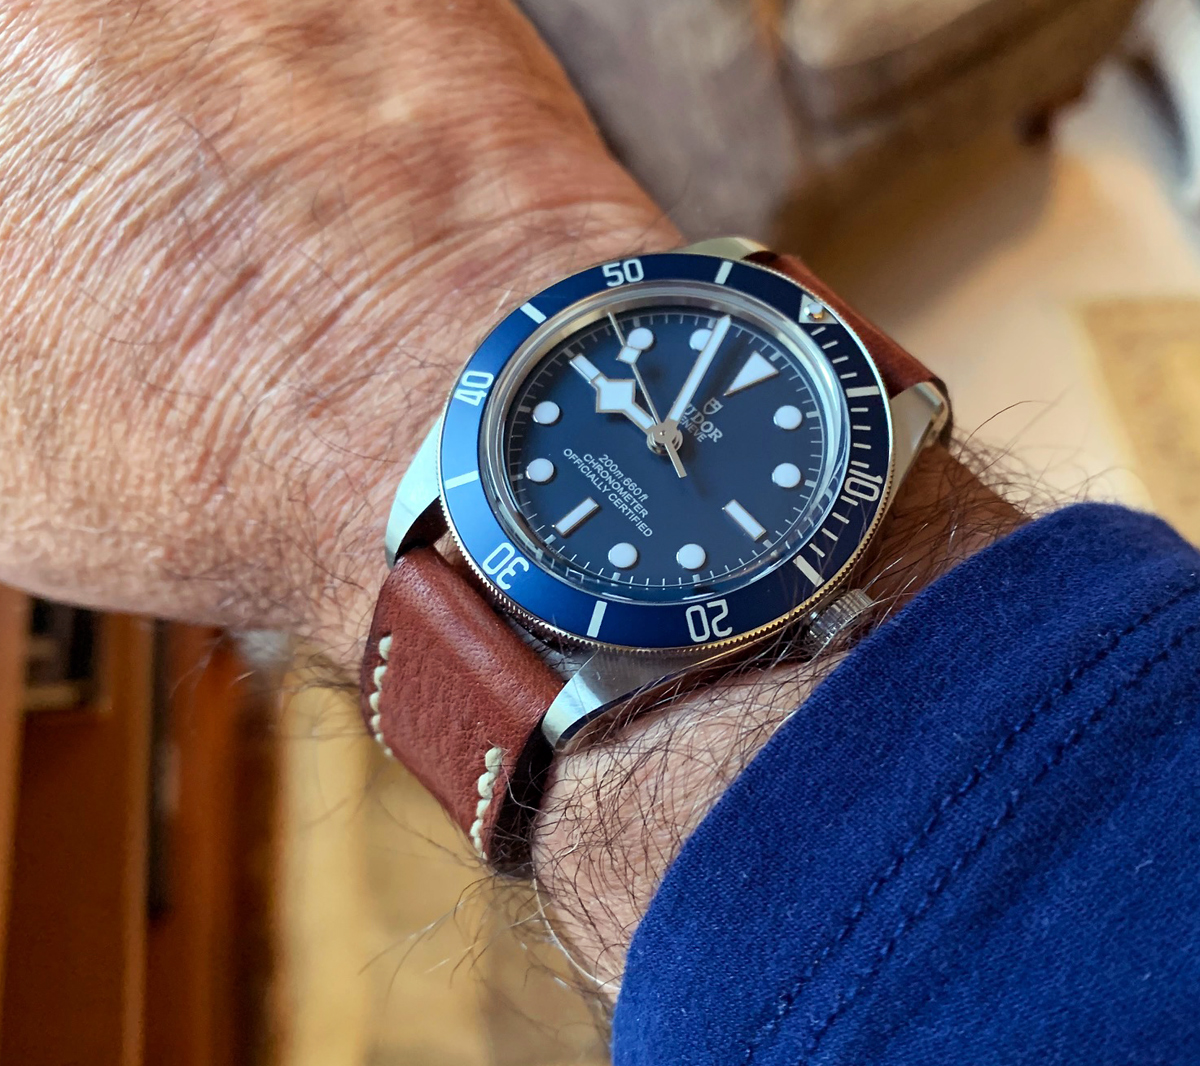 Tudor Black Bay 58 Blue on Cyclone leather with natural stitching. © Stephen Kirsch